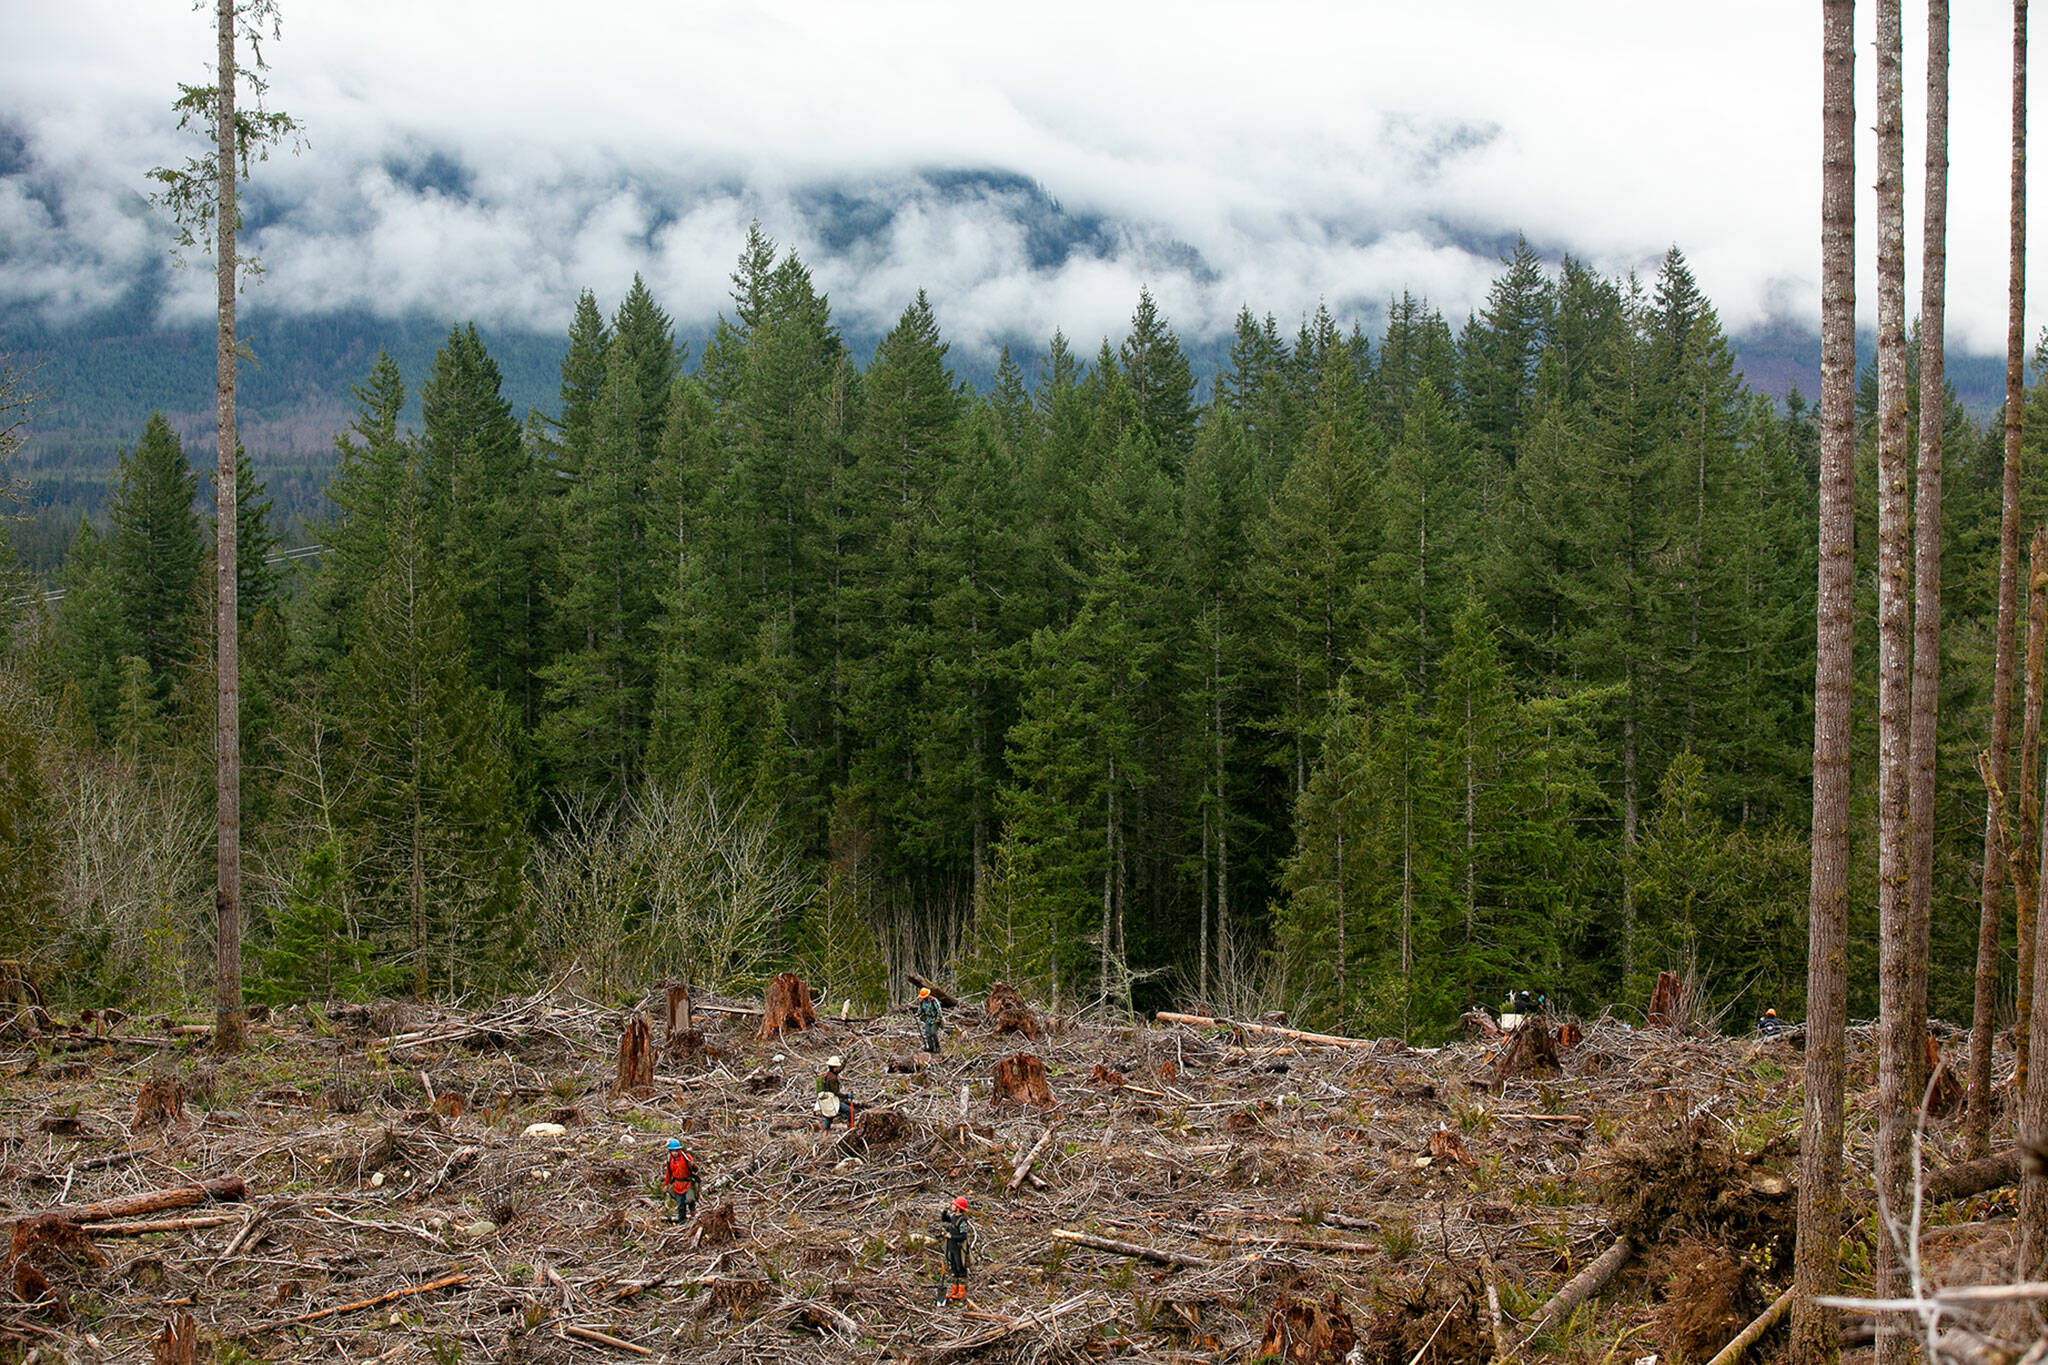 Workers traverse the site of the Middle May timber sale while planting new trees in the Reiter Foothills on Jan. 26, outside Gold Bar. (Ryan Berry / The Herald)